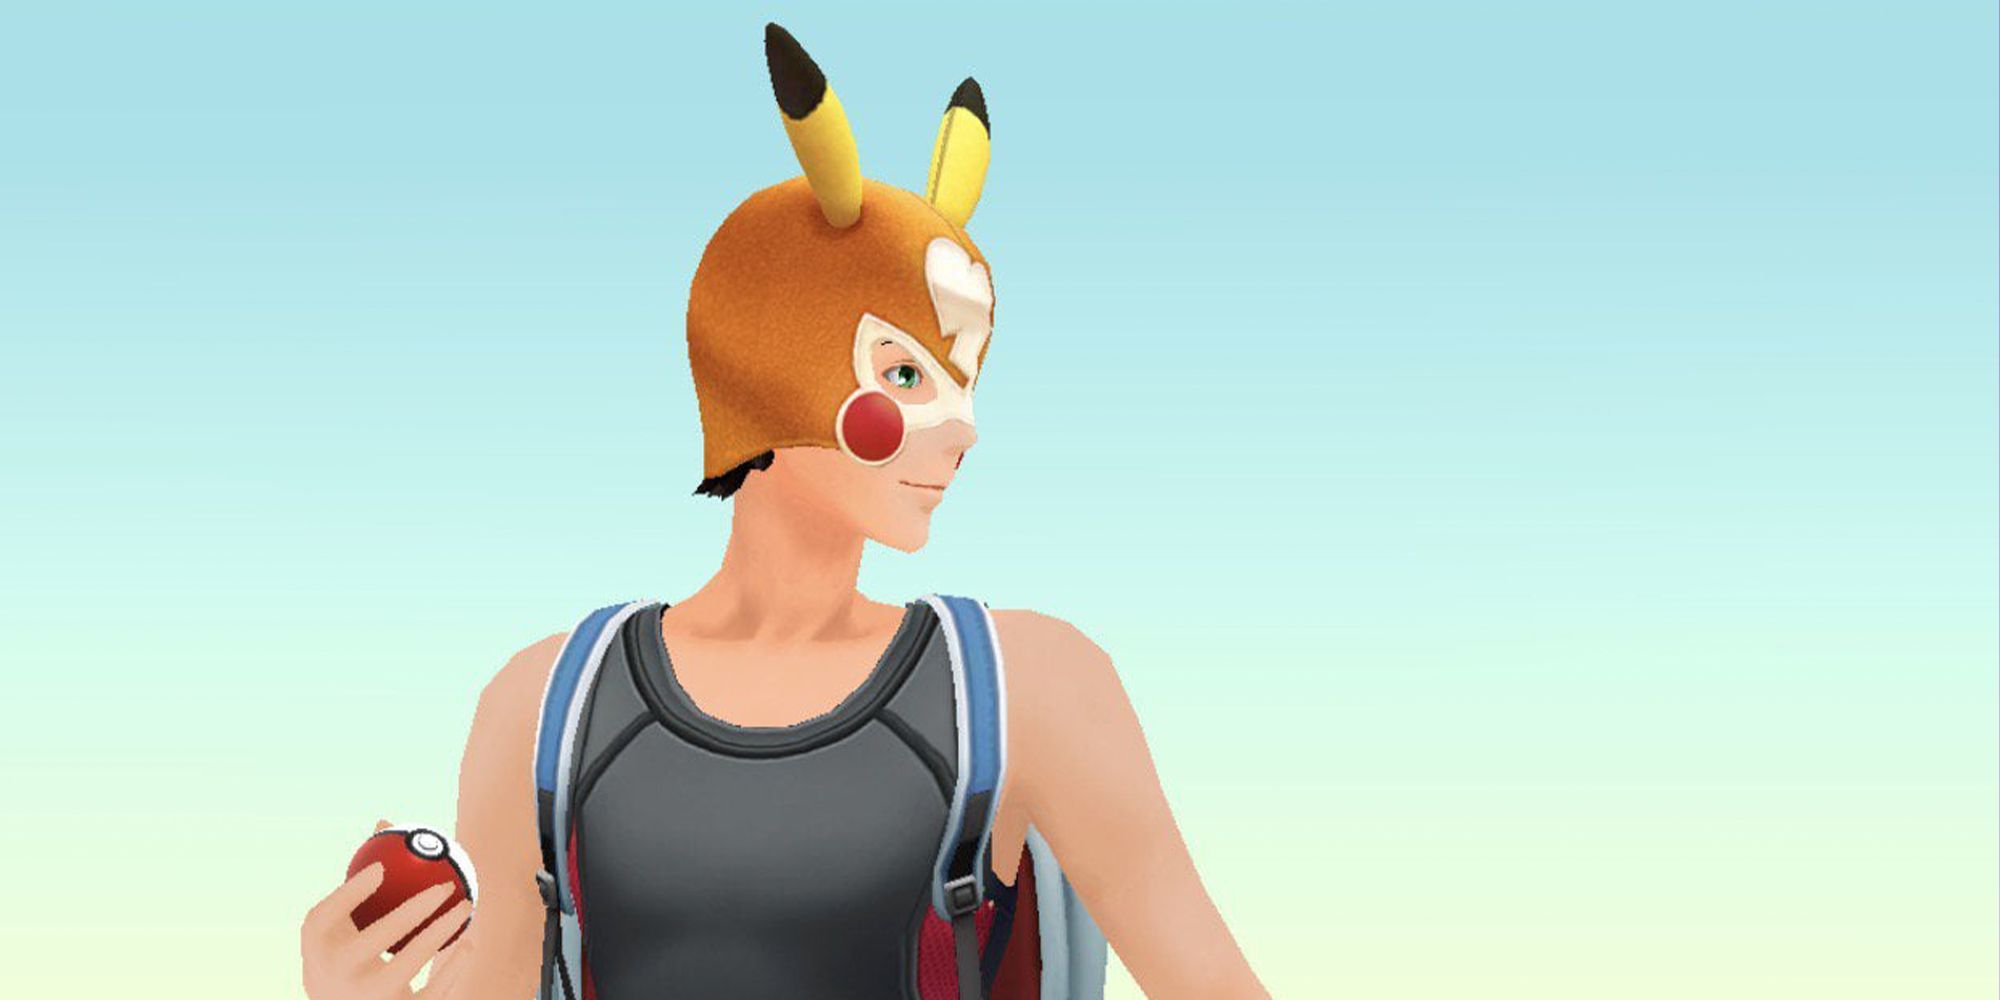 Pikachu Libre Is Easier Than Ever To Obtain in Pokémon GO